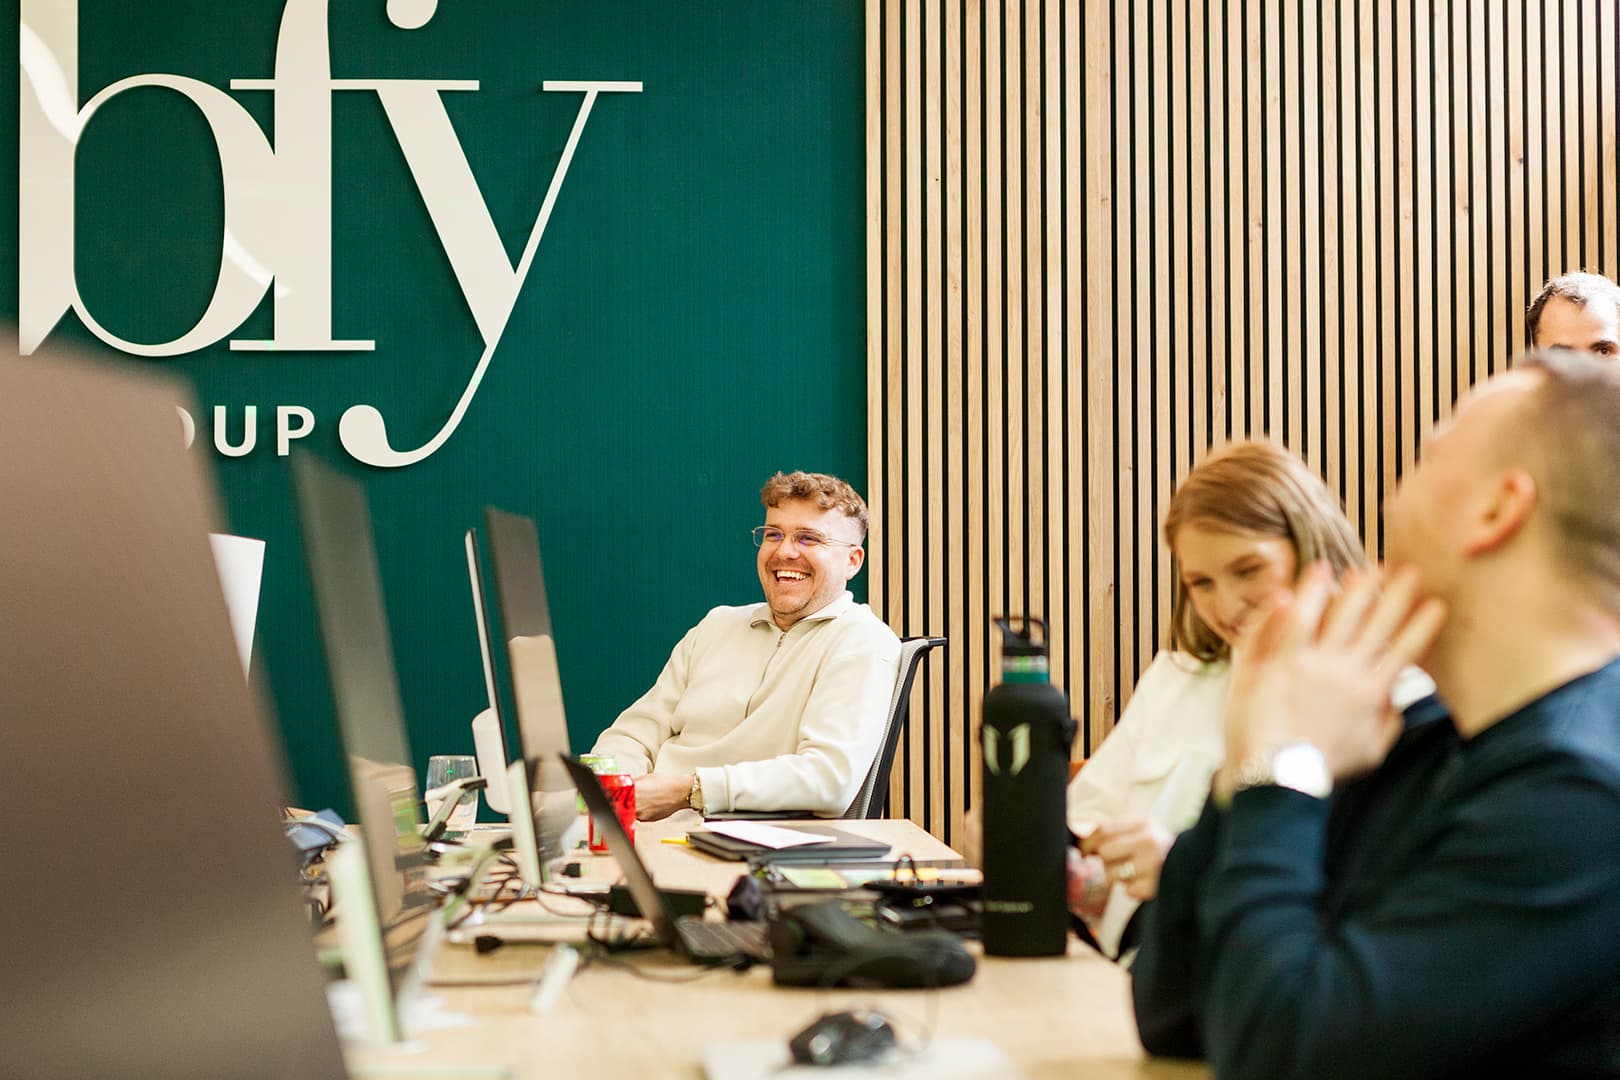 Members of the BFY Group team working in the BFY office.